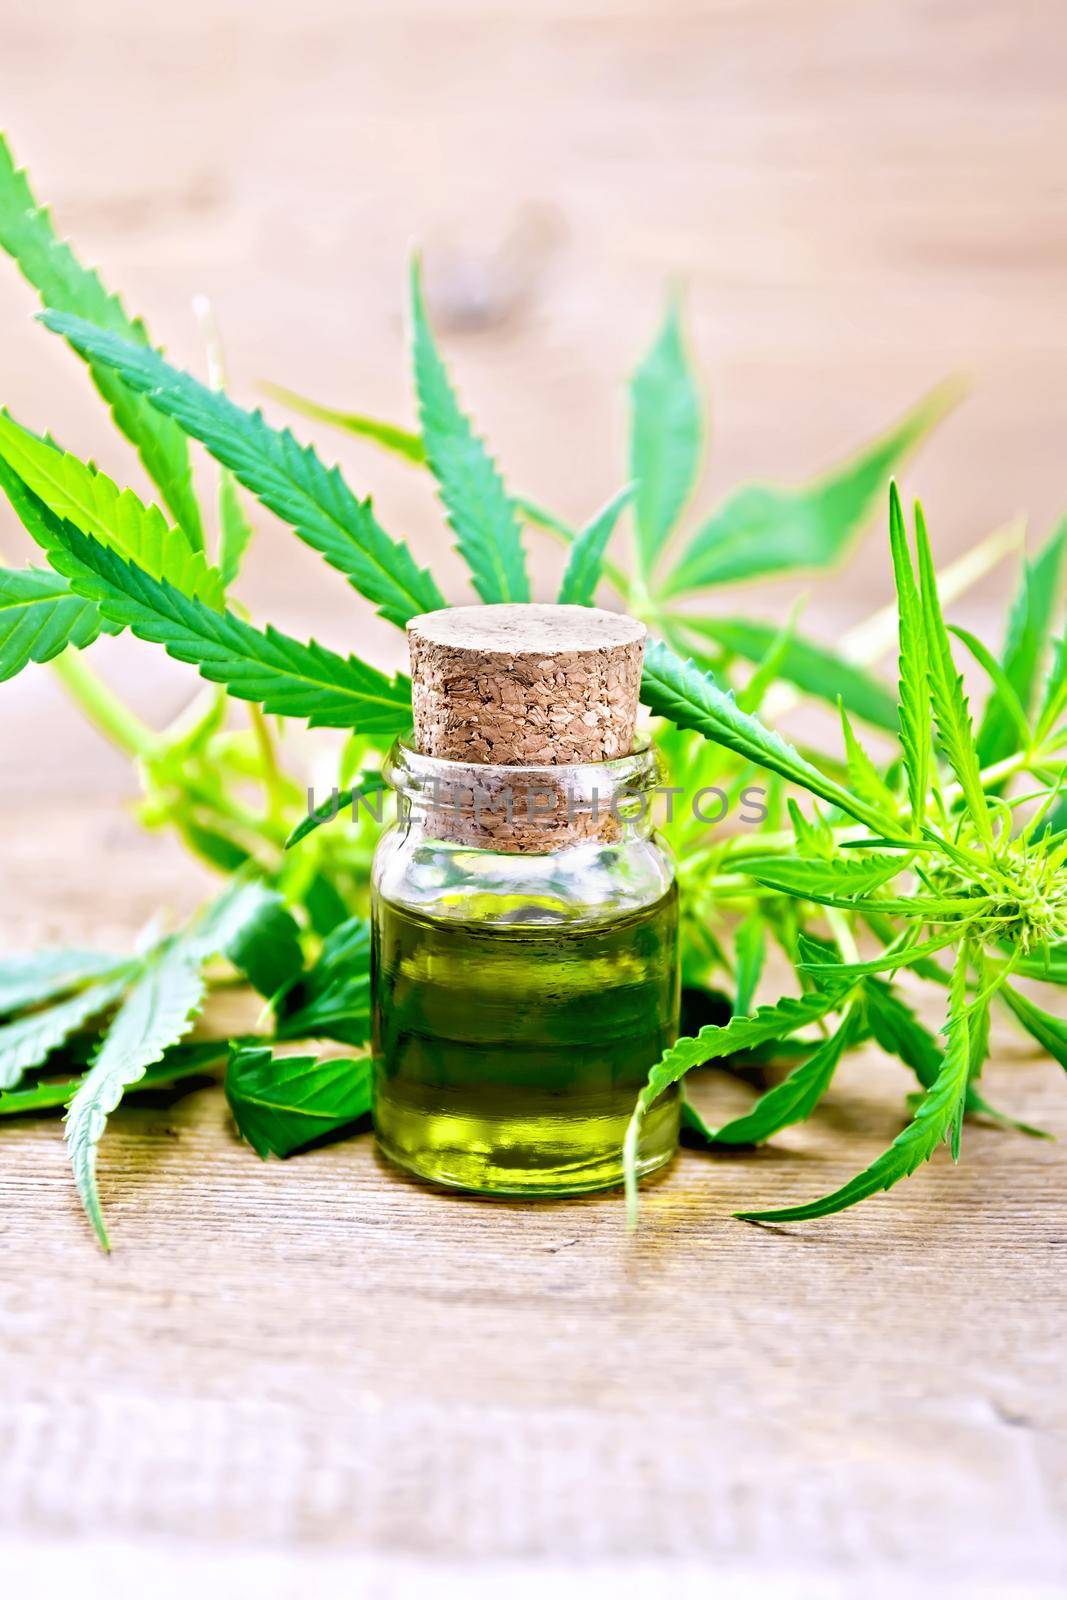 Hemp oil in a glass bottle, leaves and stalks of cannabis on the background of old wooden boards